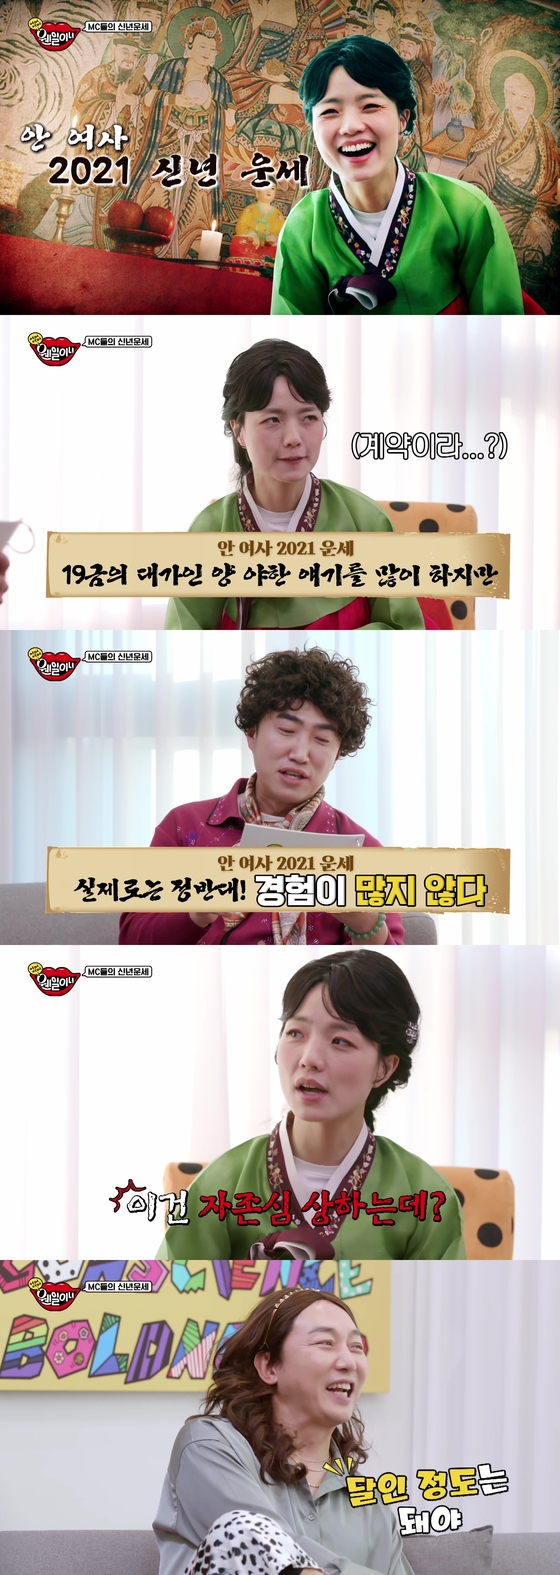 Young-mi Ahn “It’s like a 19-gold price, but it’s actually the opposite” “Pride injured” in fortune-telling